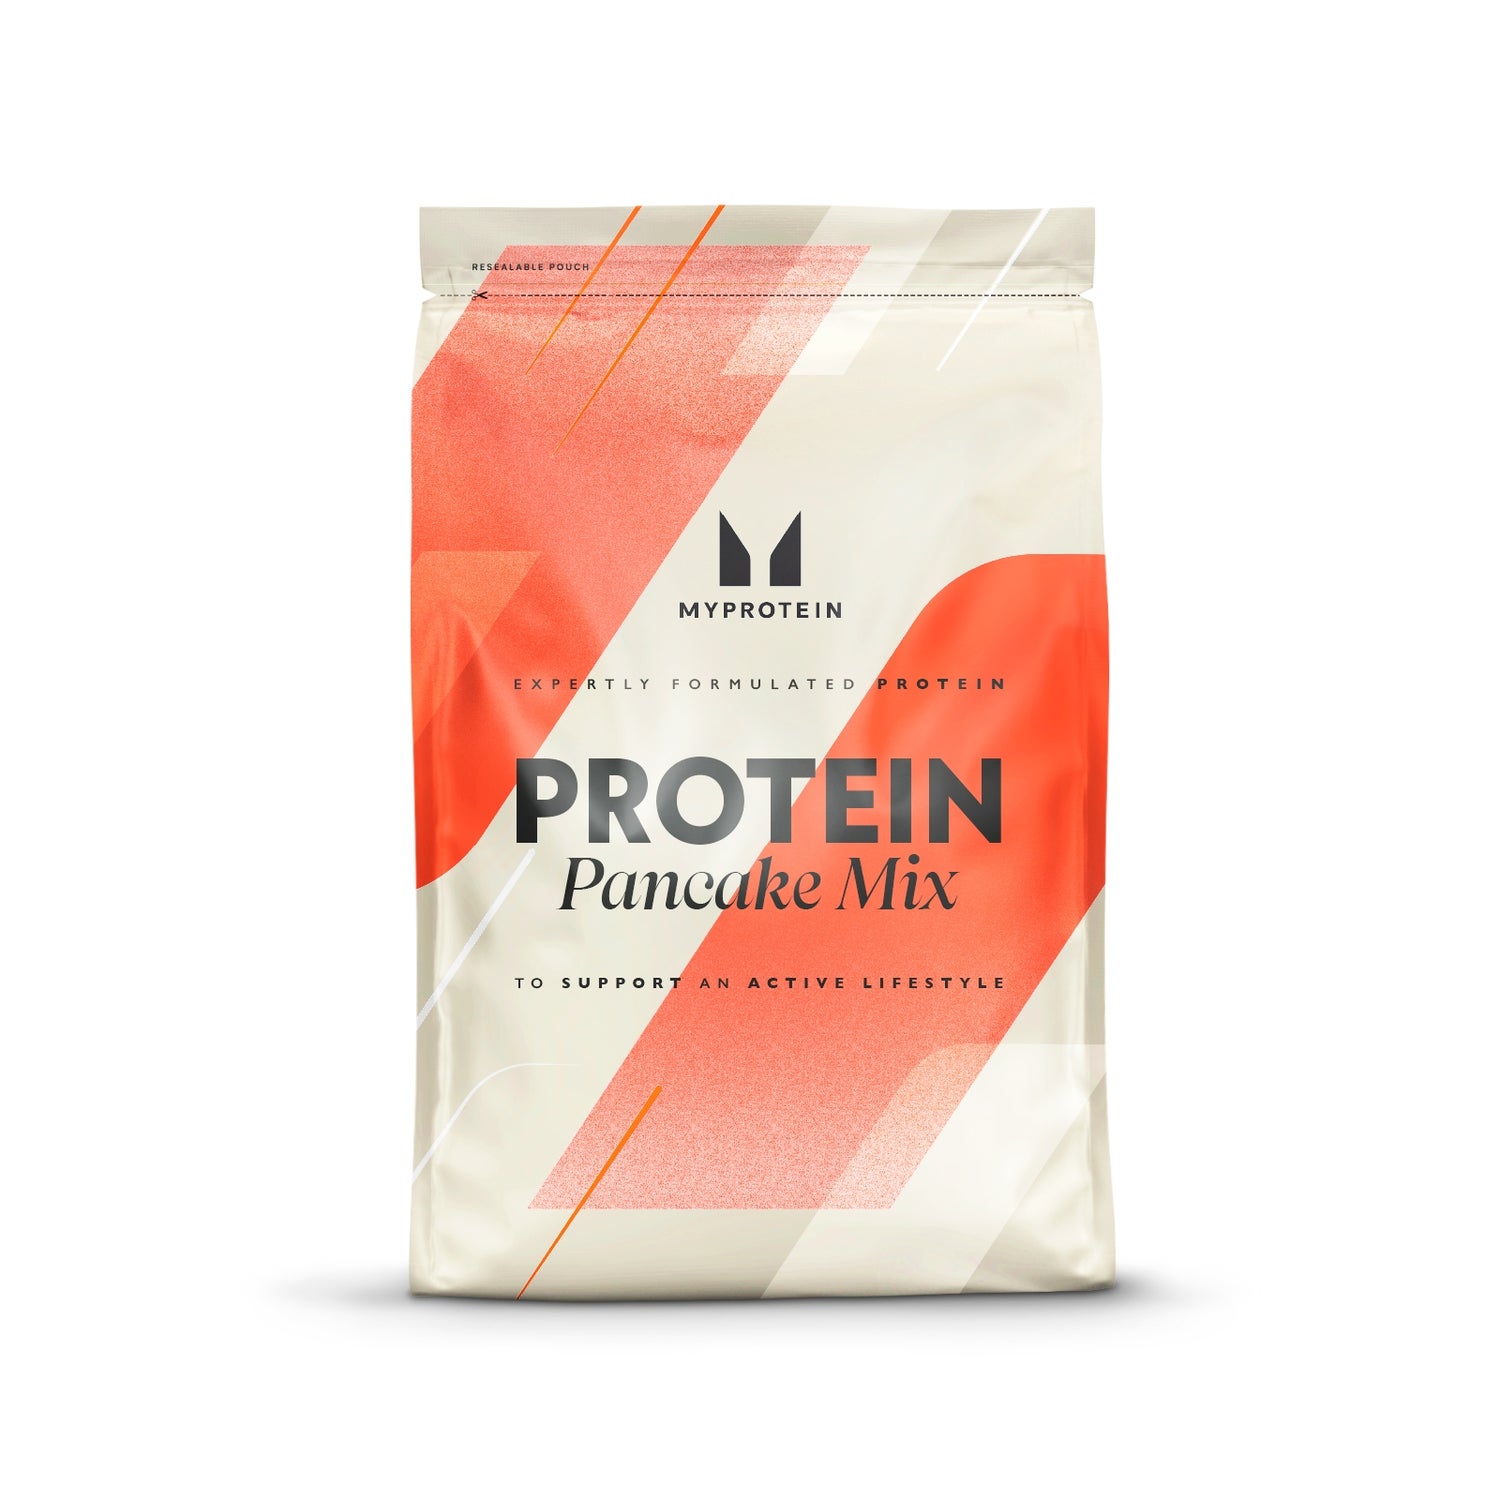 Protein Pandekage Mix - 200g - Golden Syrup